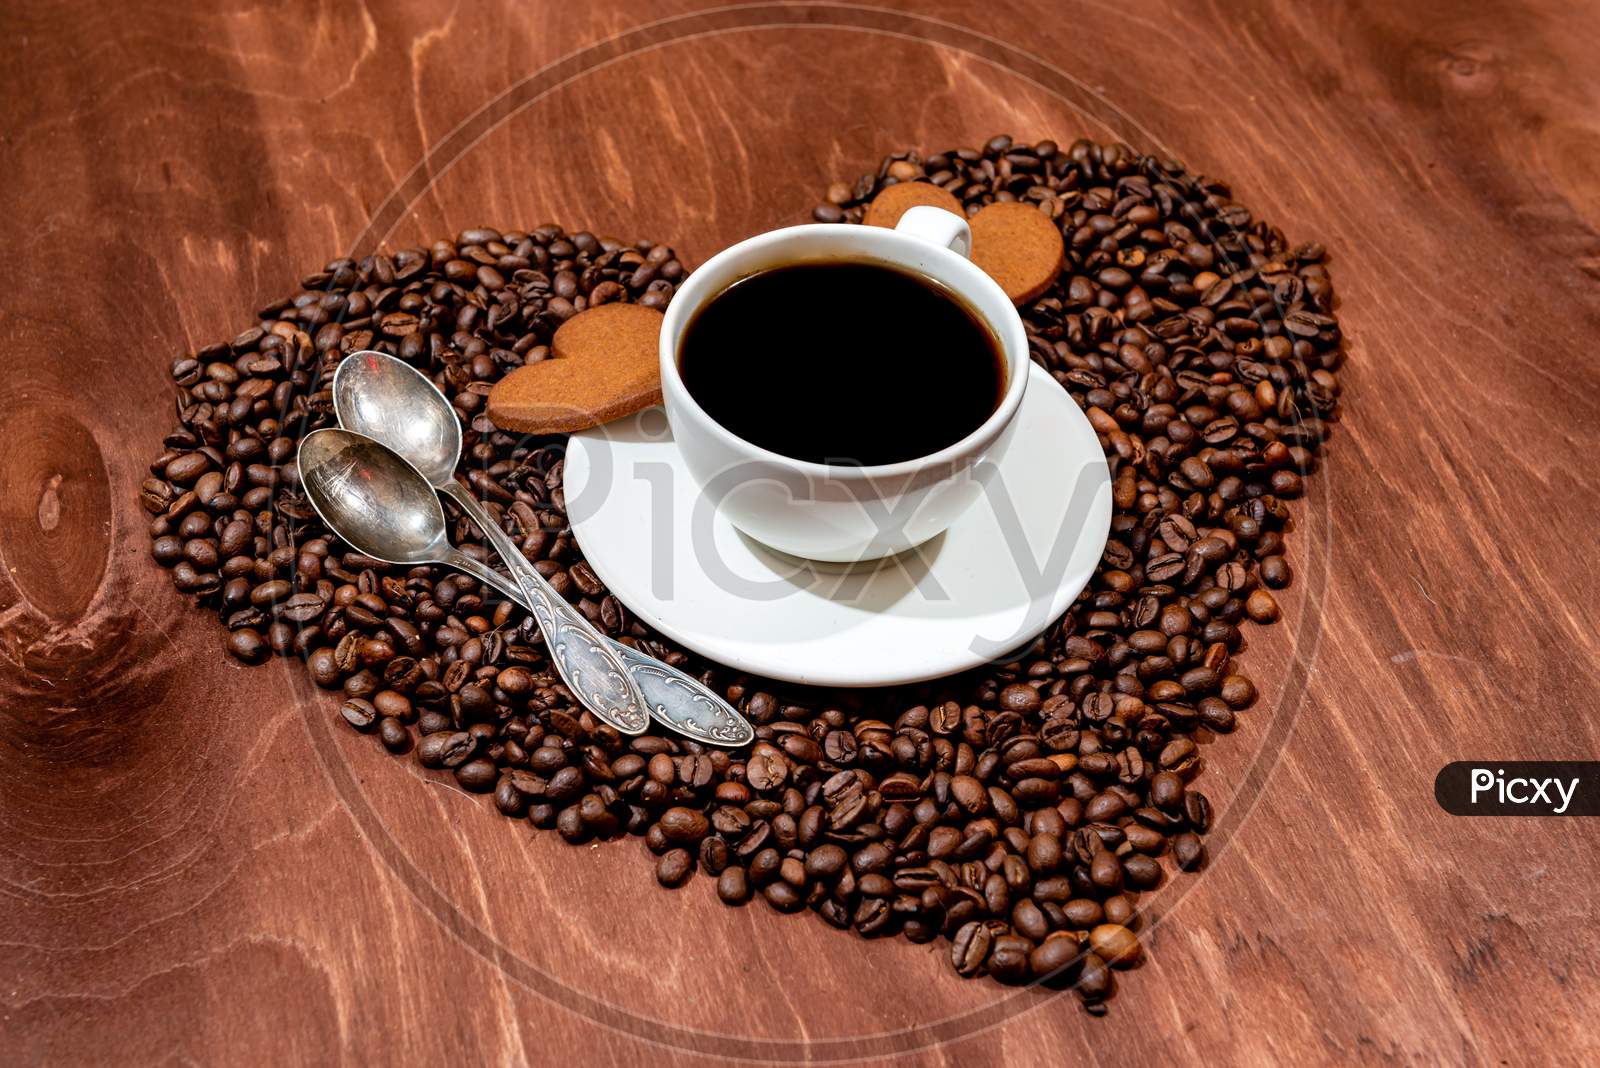 White Coffee Mug, Heart Shaped Gingerbread And Two Spoons On A Heart Shaped Base Made From Coffee Beans